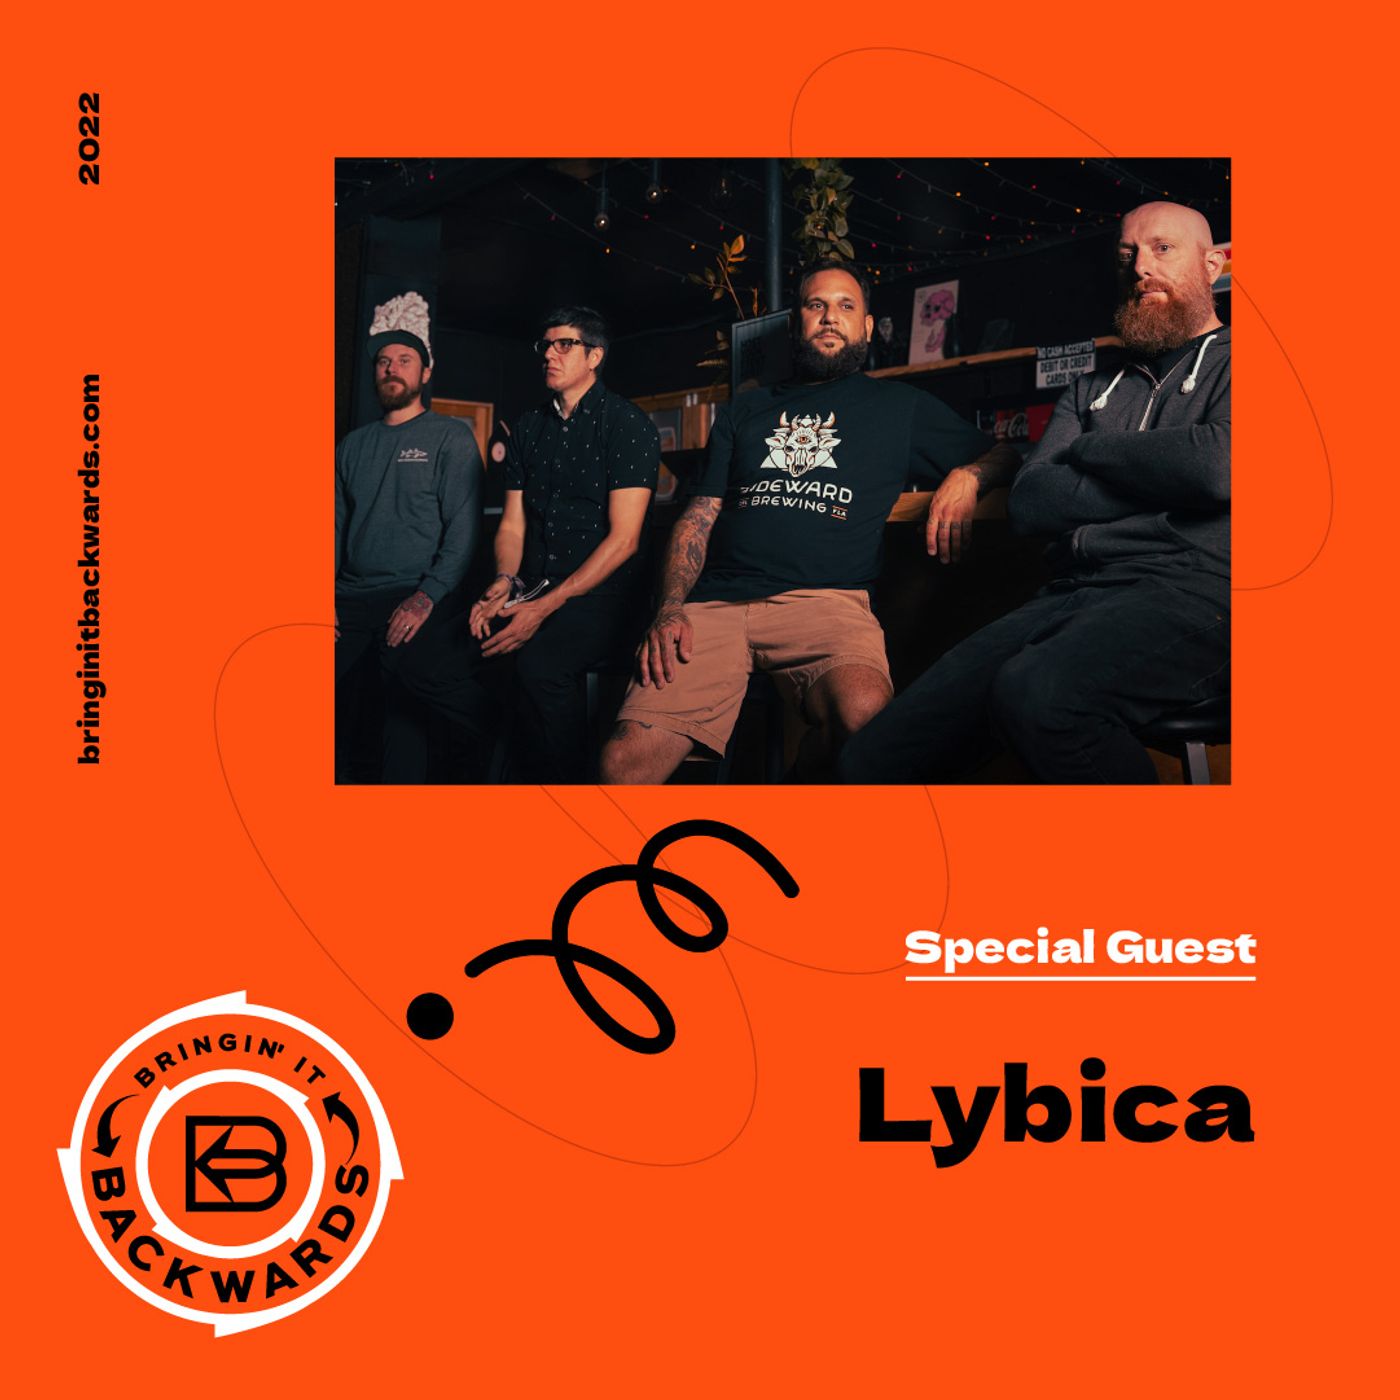 Interview with Lybica Image